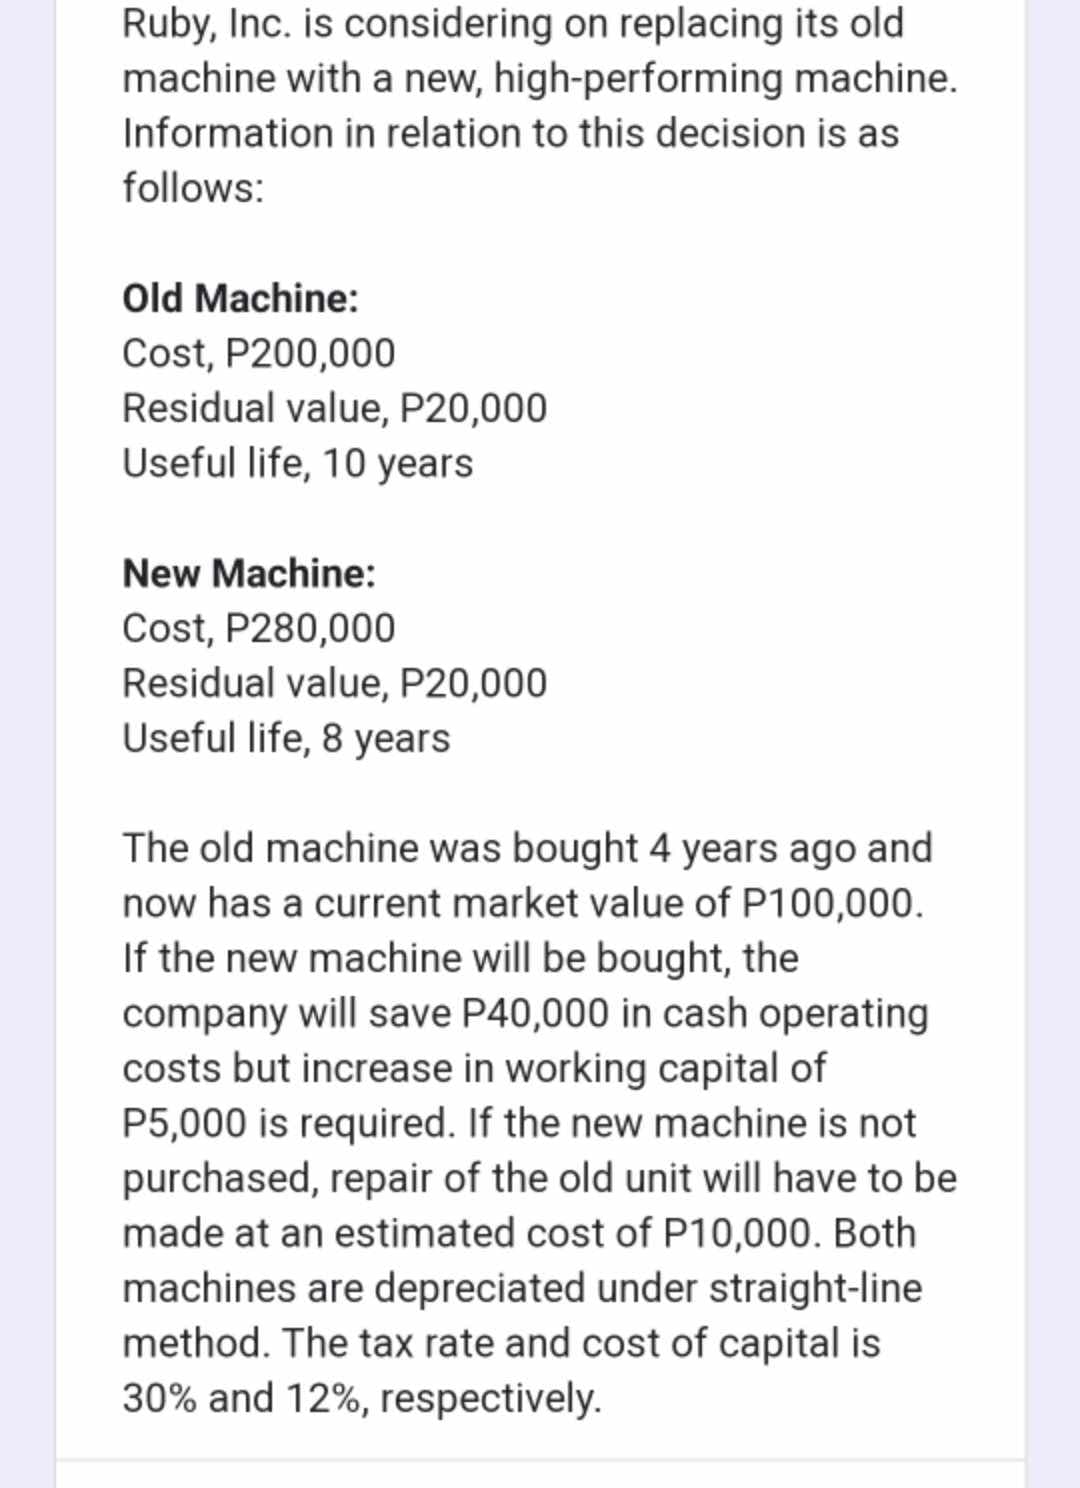 Ruby, Inc. is considering on replacing its old
machine with a new, high-performing machine.
Information in relation to this decision is as
follows:
Old Machine:
Cost, P200,000
Residual value, P20,000
Useful life, 10 years
New Machine:
Cost, P280,000
Residual value, P20,000
Useful life, 8 years
The old machine was bought 4 years ago and
now has a current market value of P100,000.
If the new machine will be bought, the
company will save P40,000 in cash operating
costs but increase in working capital of
P5,000 is required. If the new machine is not
purchased, repair of the old unit will have to be
made at an estimated cost of P10,000. Both
machines are depreciated under straight-line
method. The tax rate and cost of capital is
30% and 12%, respectively.